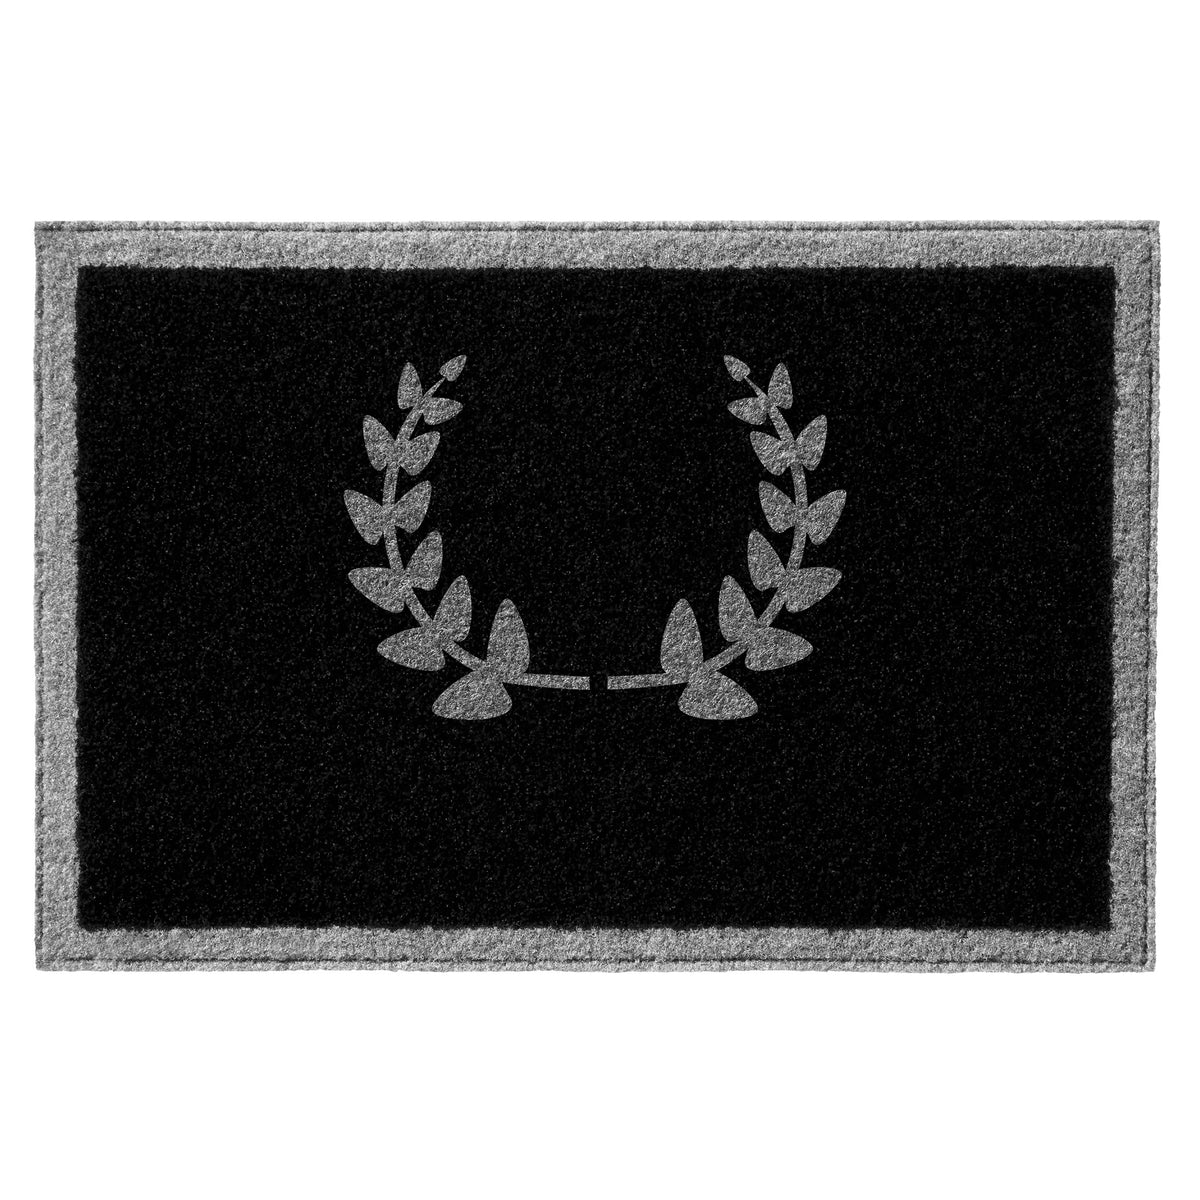 Infinity Custom Mats™ All-Weather Personalized Door Mat - STYLE: WREATH COLOR: BLACK / GREY - rugsthatfit.com